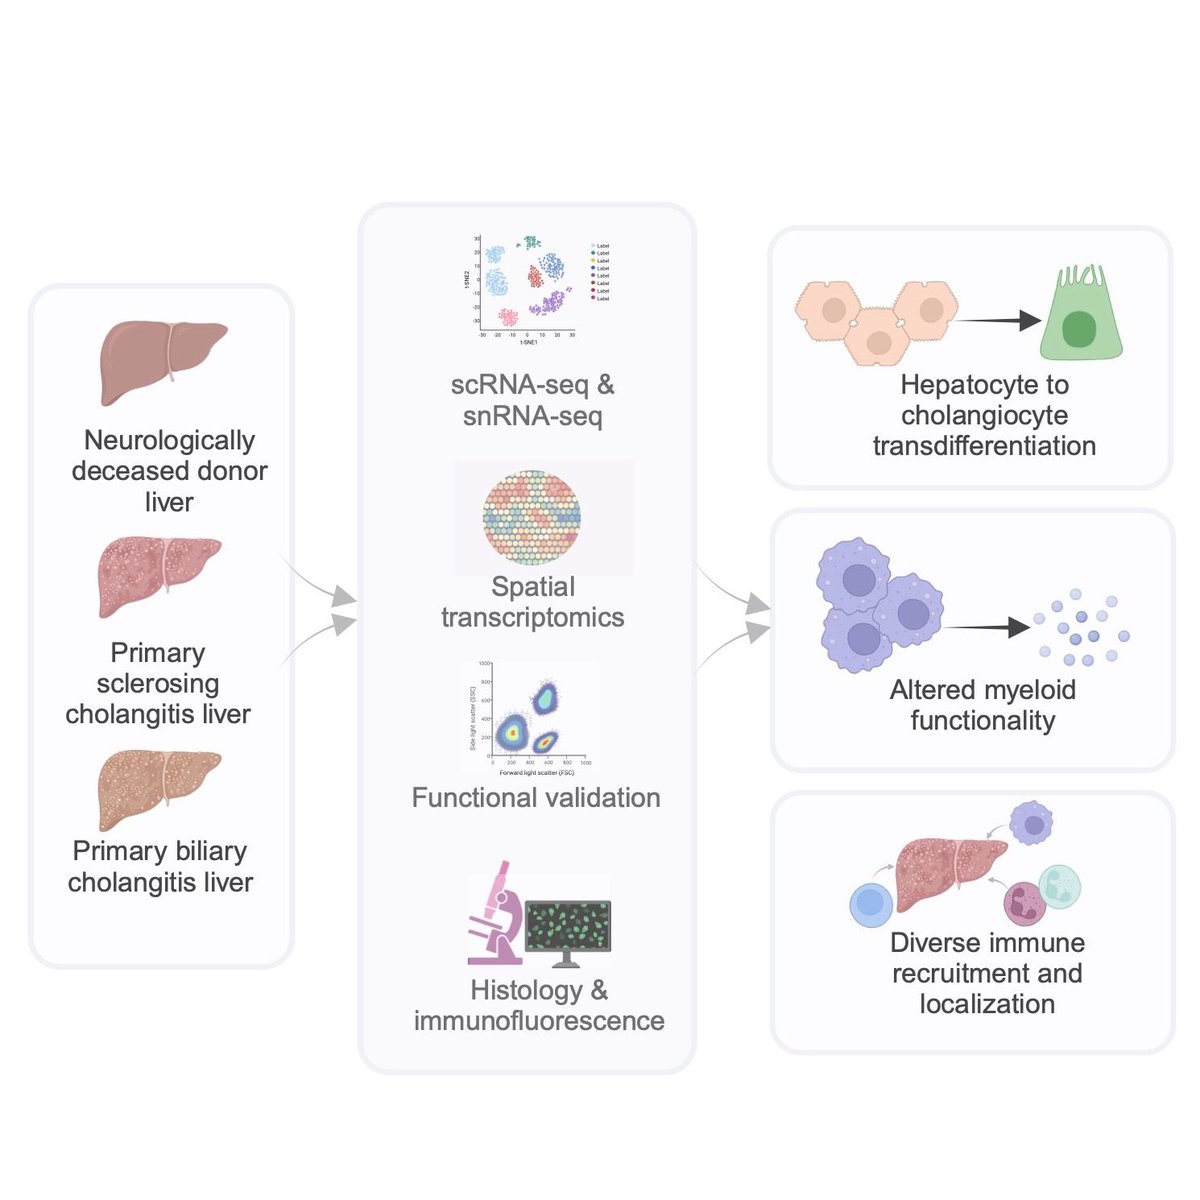 Thrilled to share our team's newest paper examining the cellular ecosystem of Primary Sclerosing Cholangitis, a rare liver disease that has no current treatments, a fact that we hope to change with our single cell, single nuc and spatial atlasing efforts! sciencedirect.com/science/articl…